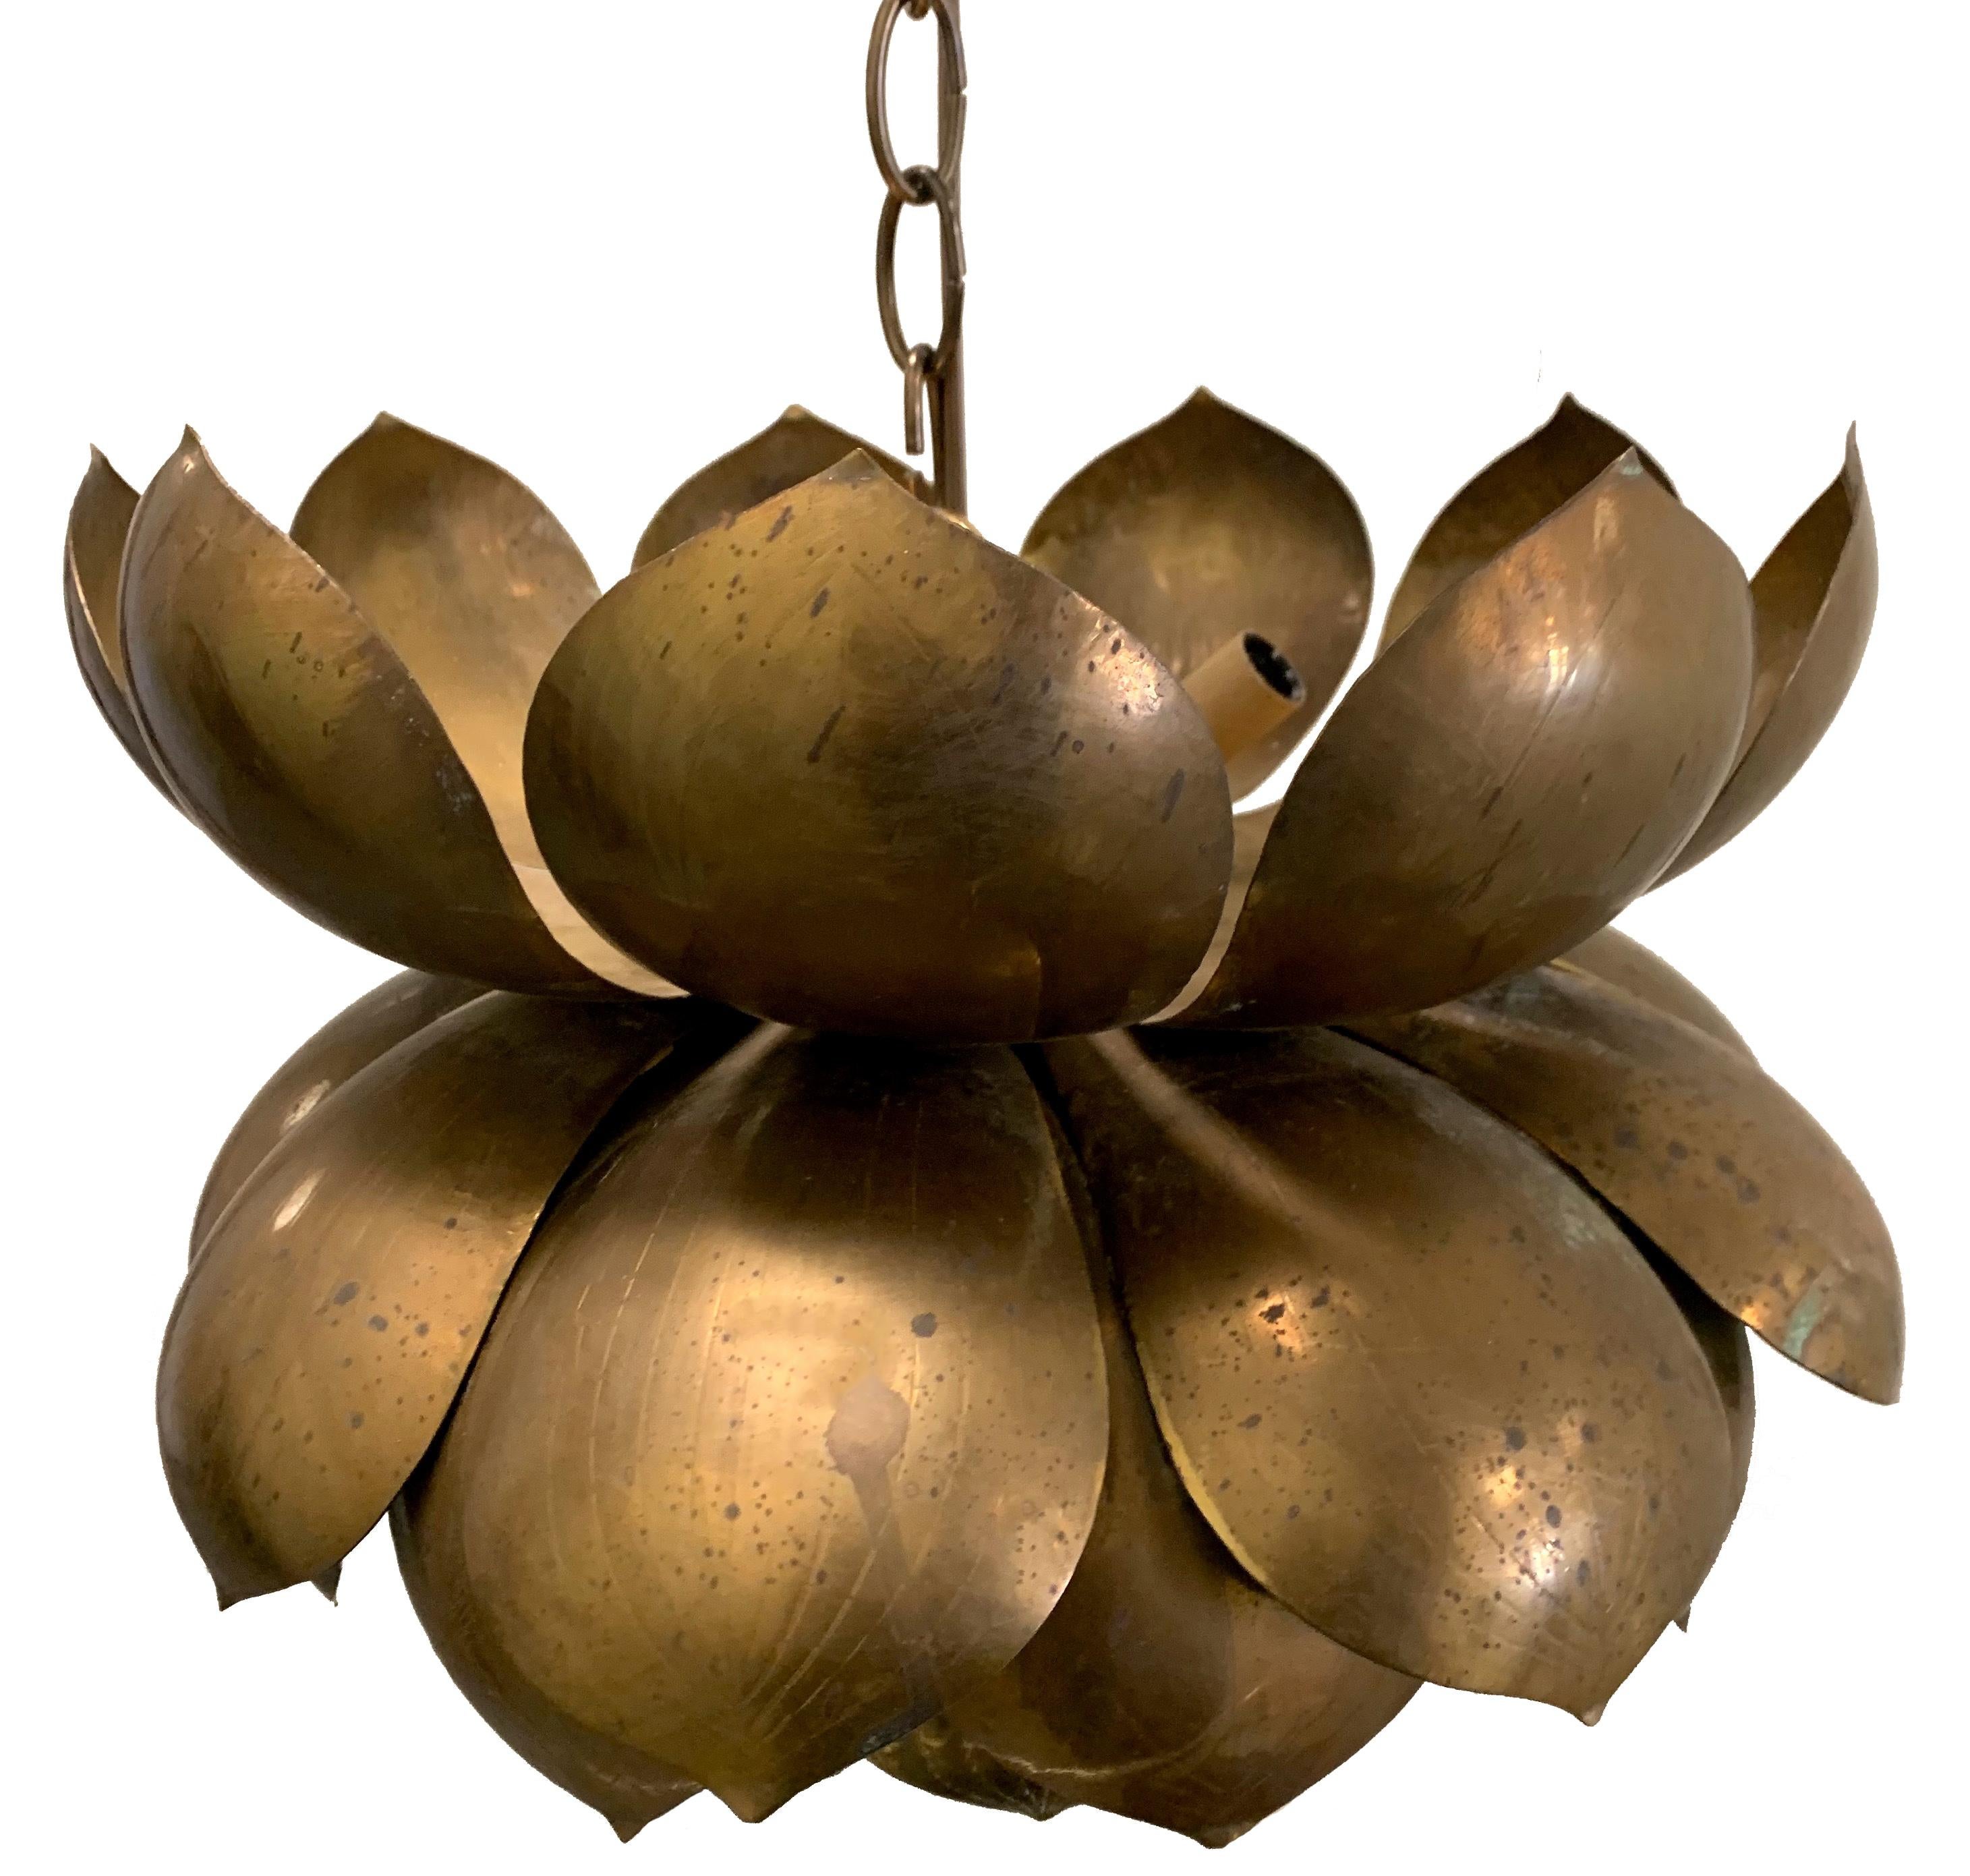 1970s Feldman large brass lotus pendant light. Newly rewired. Takes one standard bulb and three chandelier bulbs (not included). 36” L chain and new brass canopy included. Overall unpolished dark brass patina. Can be polished or re-plated for an